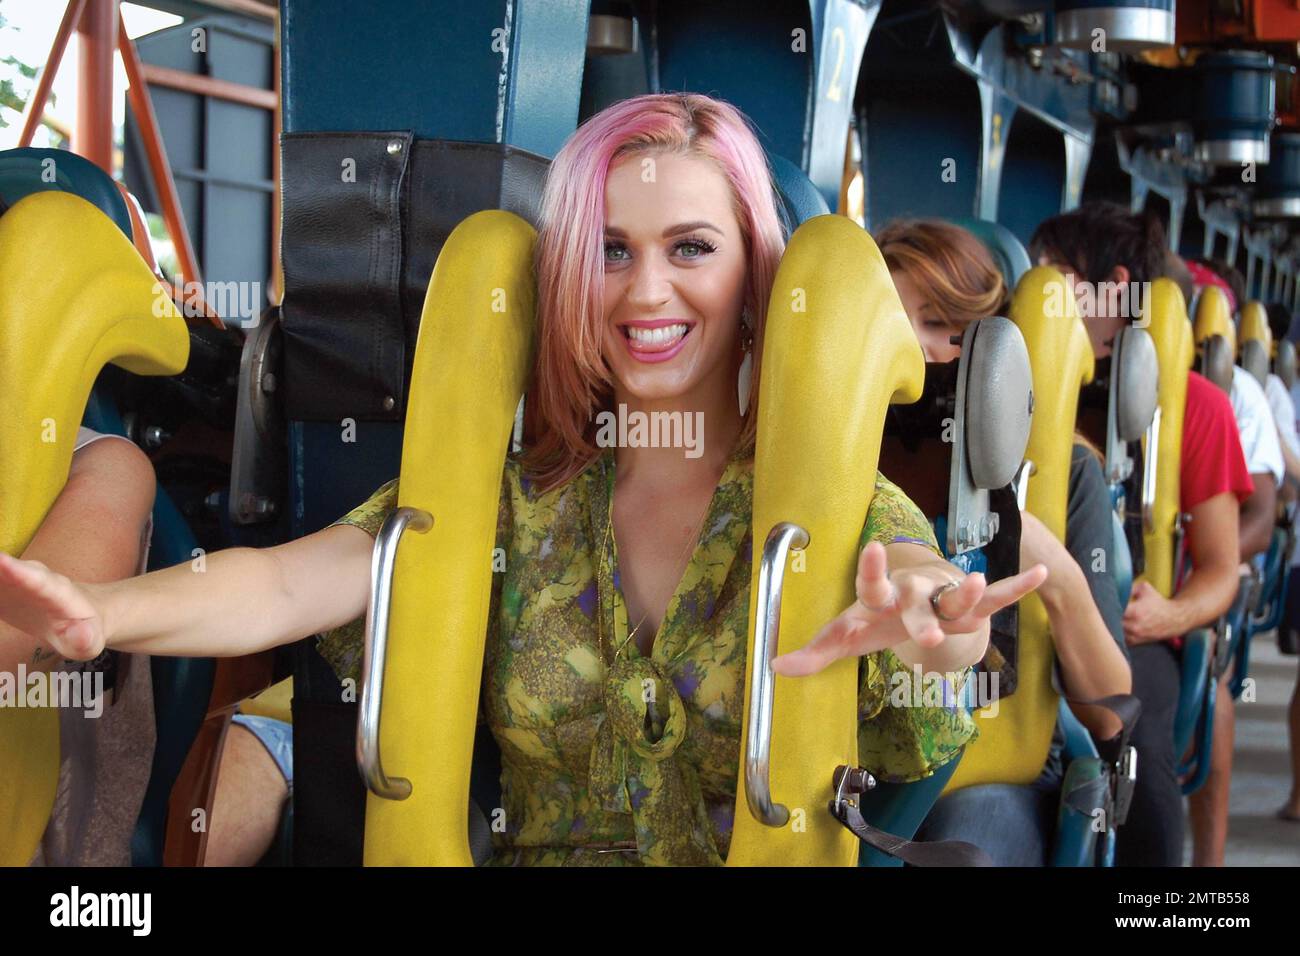 - Multi-Platinum artist Katy Perry takes time off her 'California Dreams 2011 Tour' to let loose and have some fun at Six Flags Great America with her dancers, crew and opening artist Natalia Kills. Perry fearlessly tackled the rides, Raging Bull, SUPERMAN: Ultimate Flight and BATMAN: The Ride before heading to their next concert destination. Chicago, IL. 22nd August 2011. Stock Photo